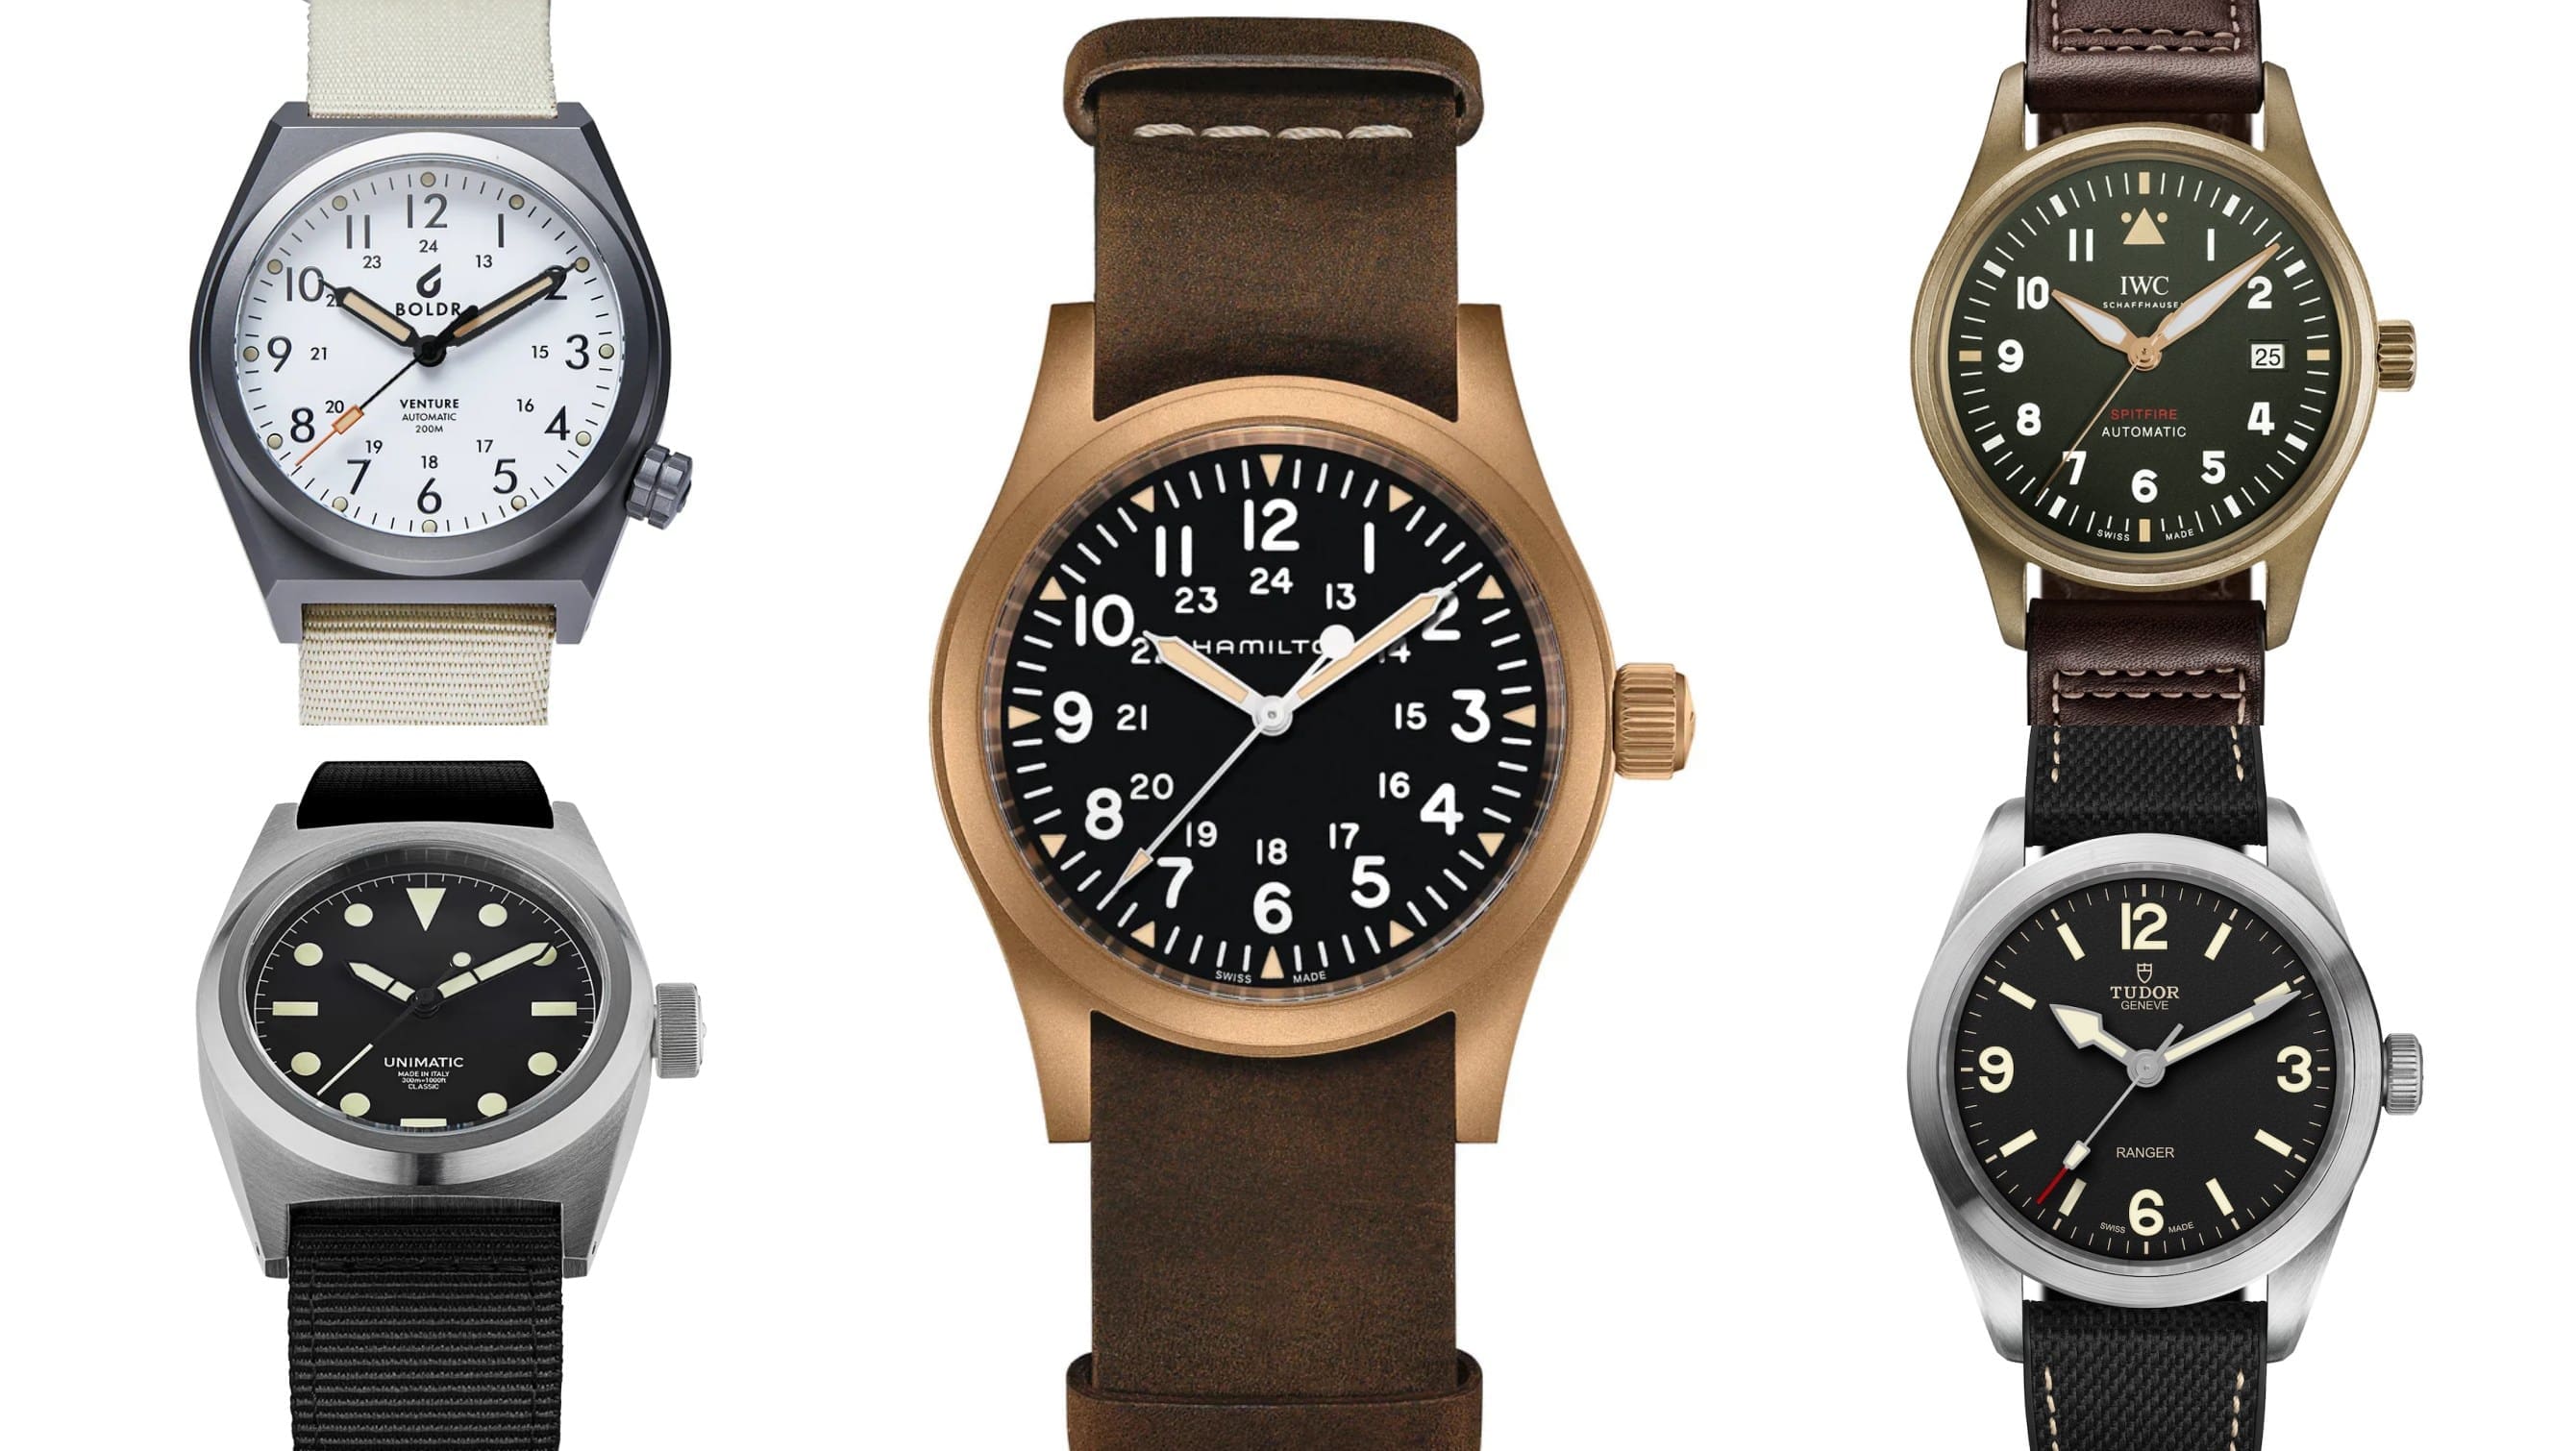 The 5 best field watches